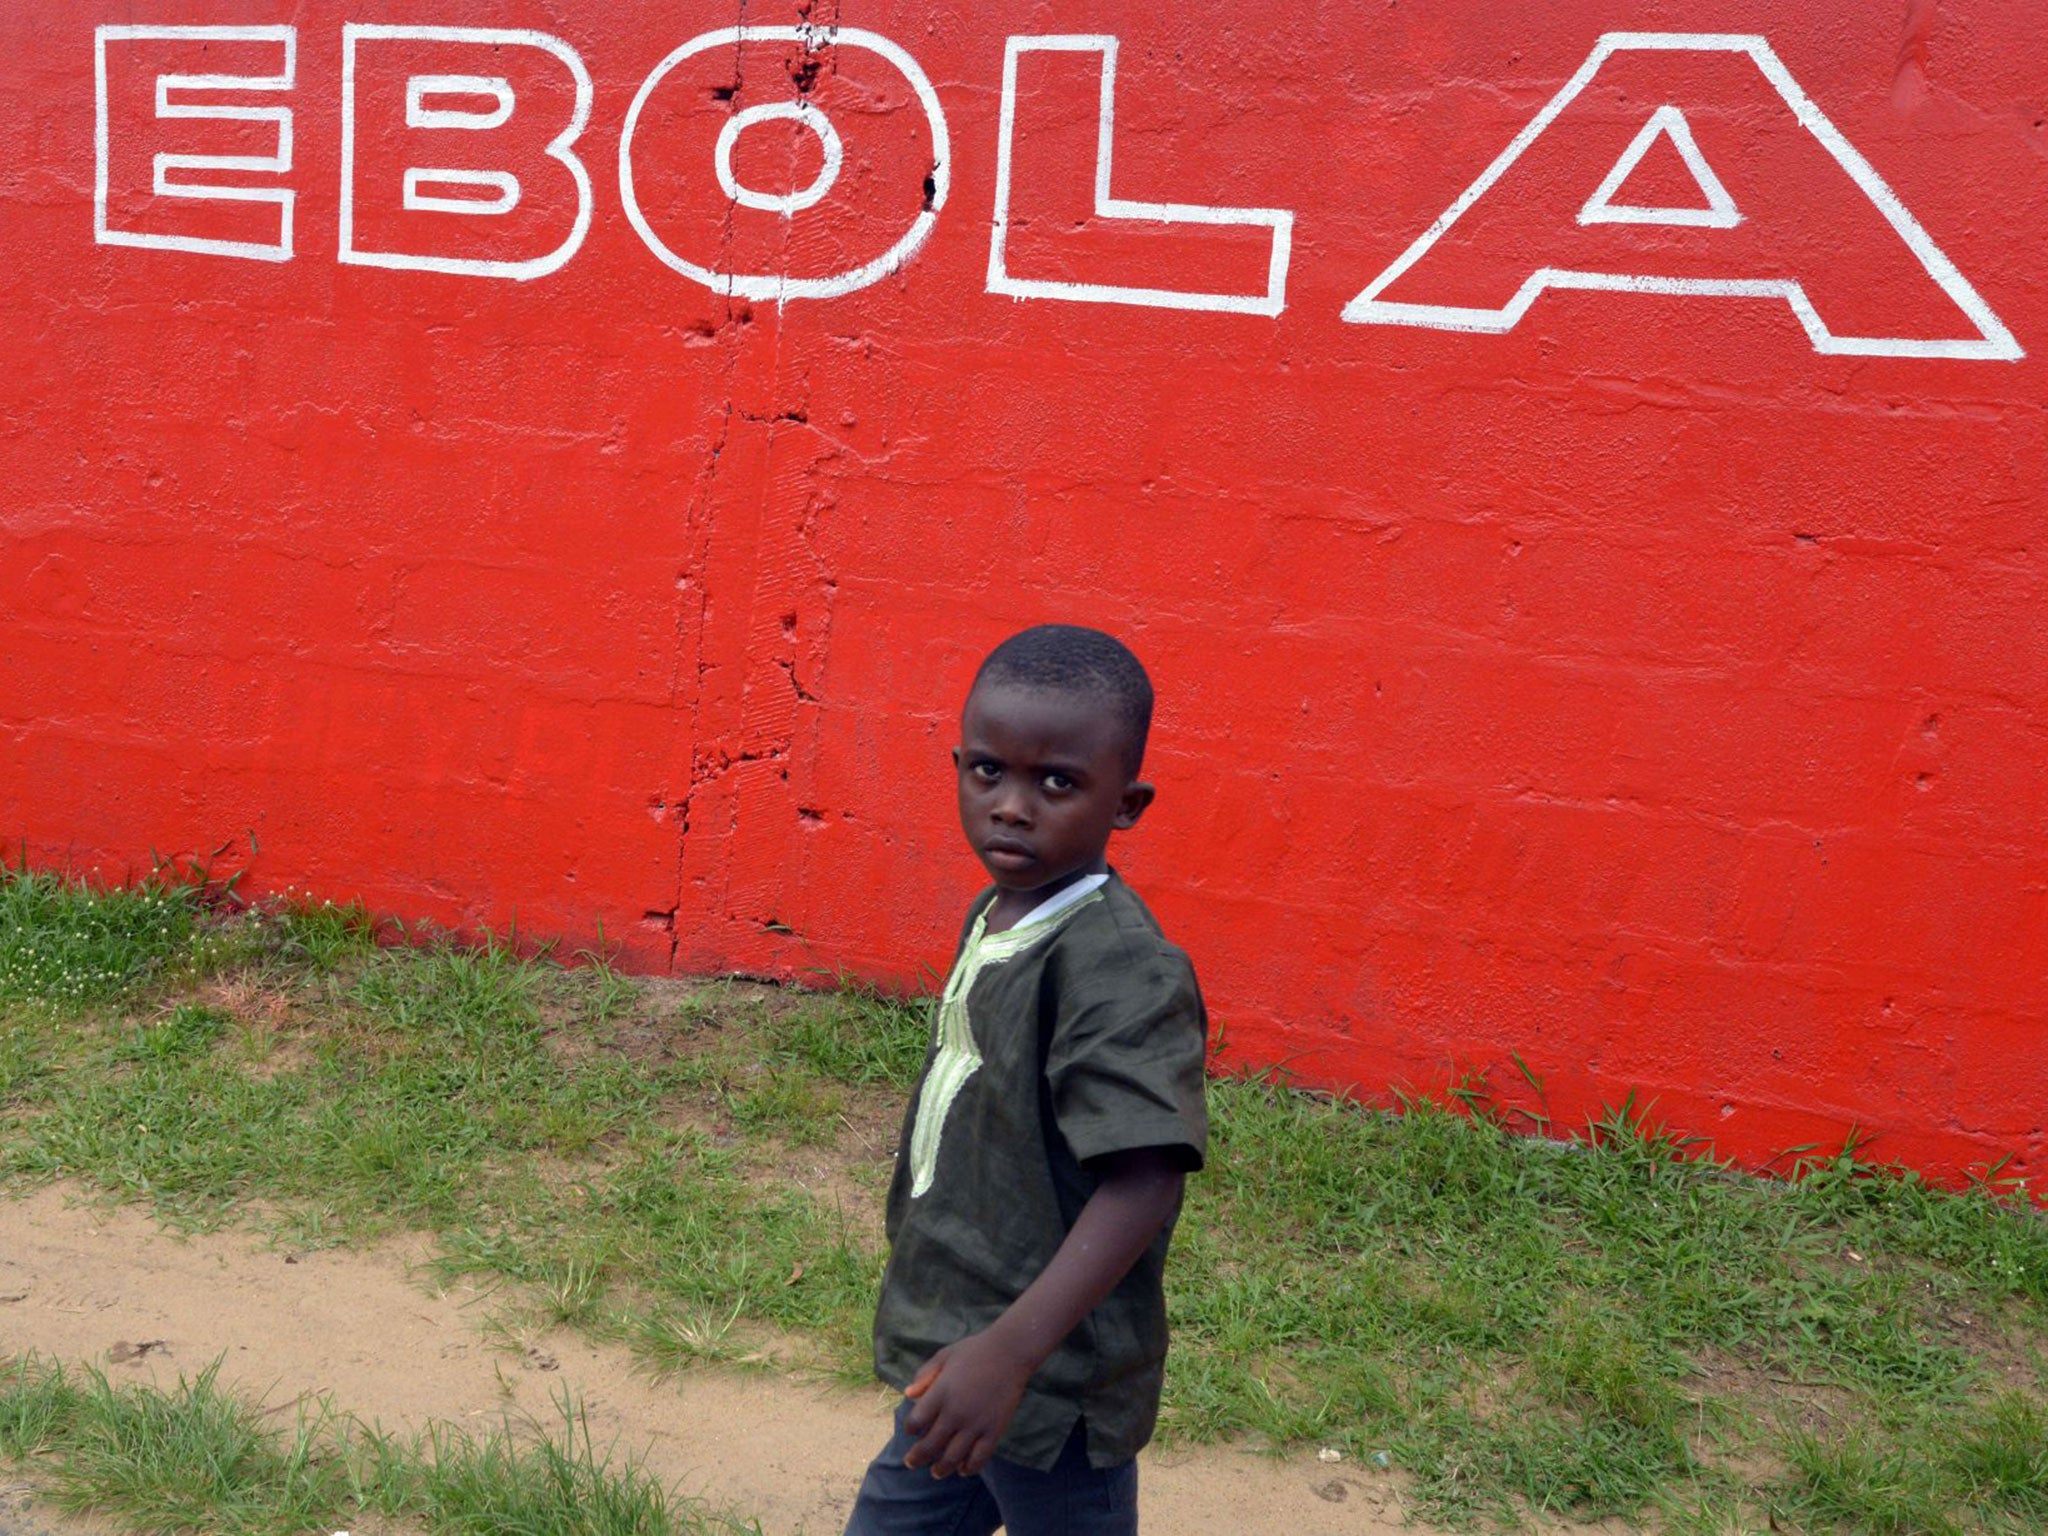 Only around 40 per cent of Liberia's healthcare facilities are currently functioning and all schools are closed